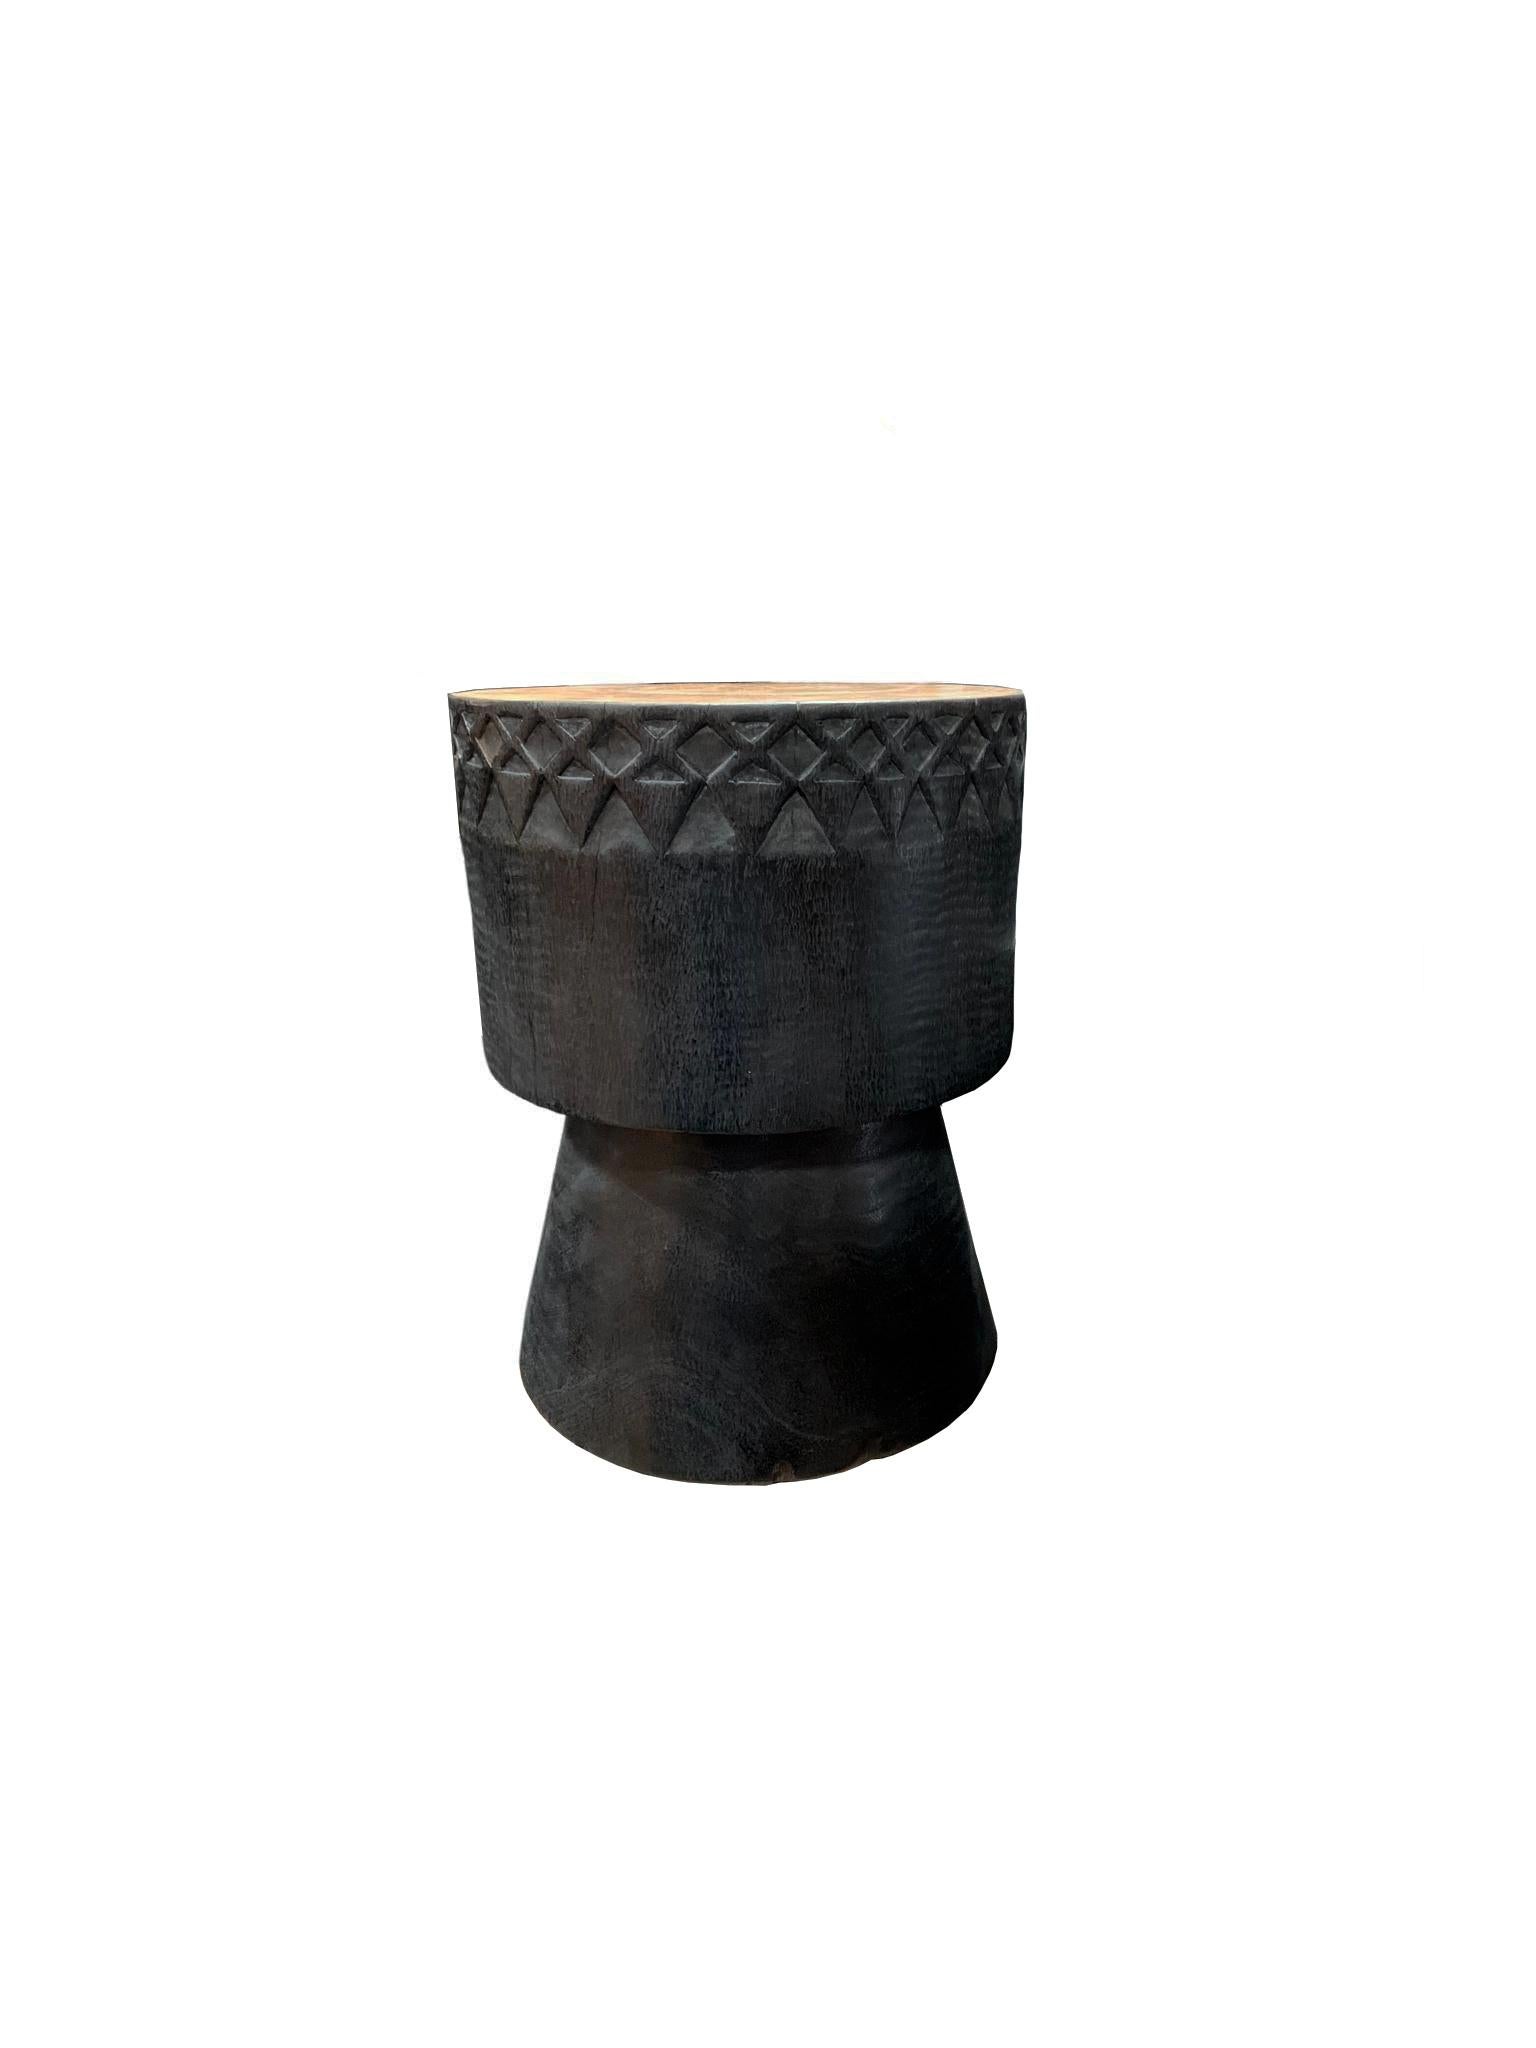 Organic Modern Sculptural Side Table Crafted from Mango Wood with Tribal Engravings For Sale